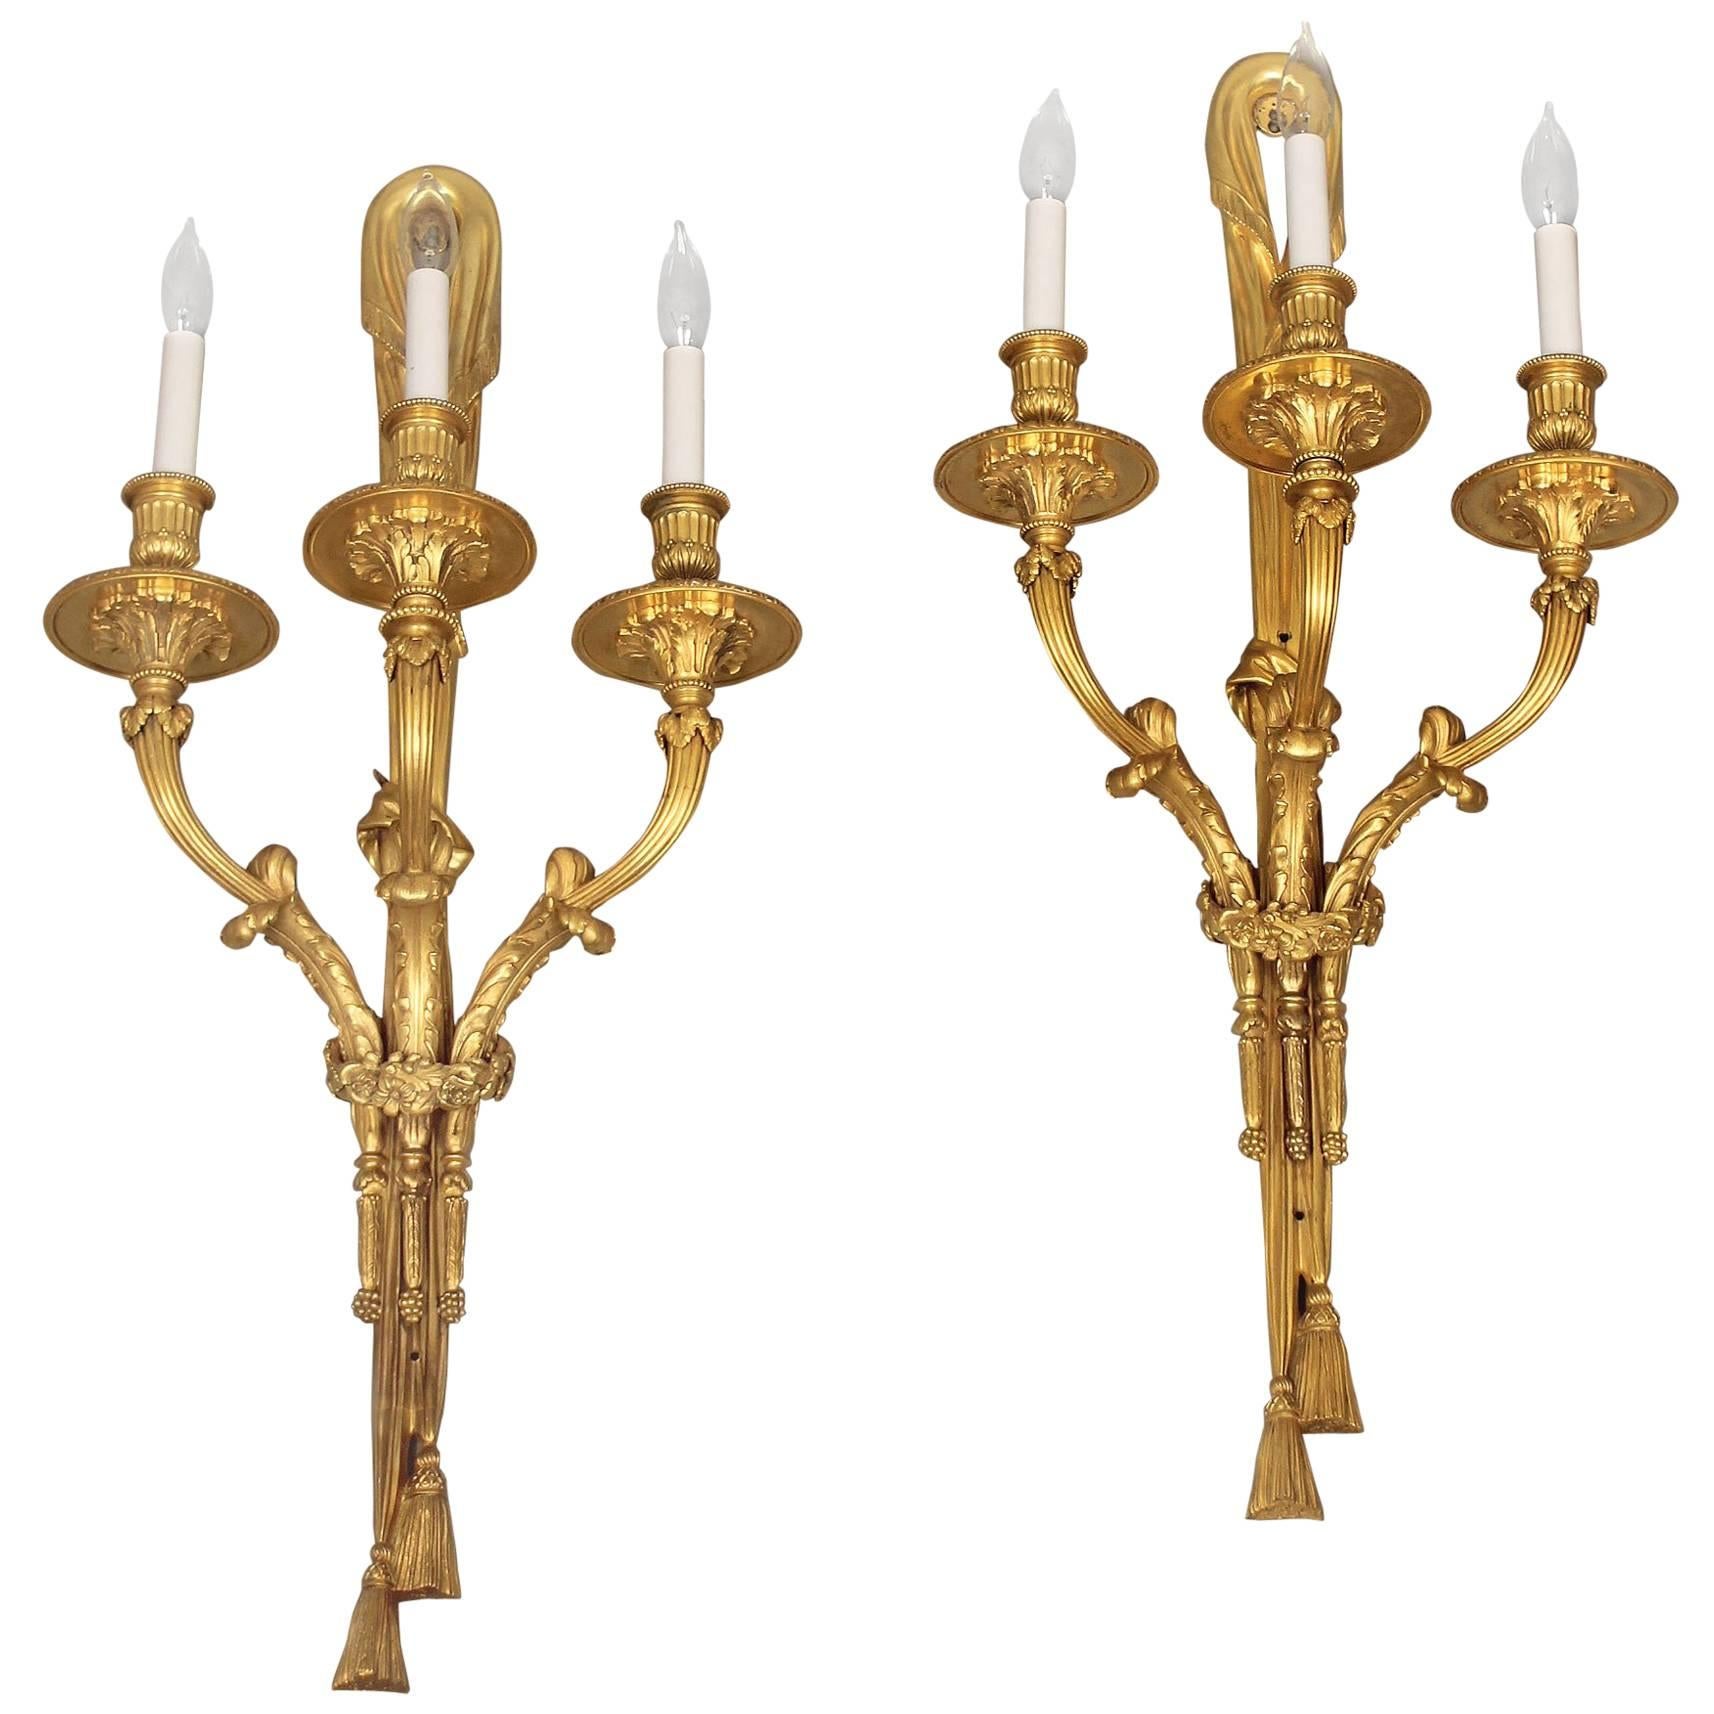 Excellent Pair of Early 20th Century Gilt Bronze Sconces by Caldwell For Sale